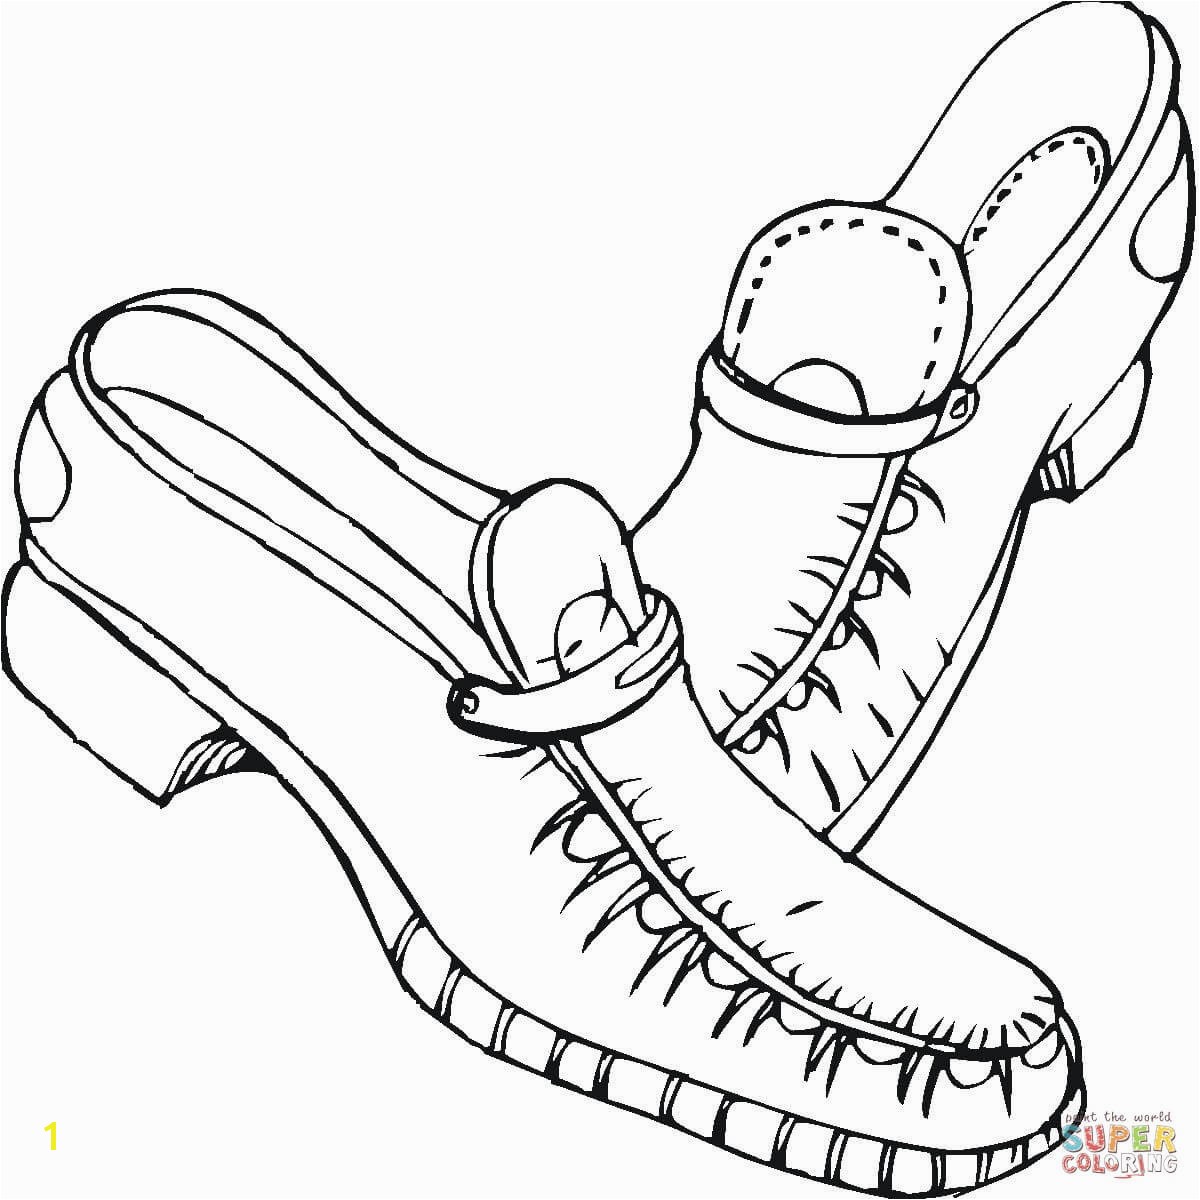 Printable Tennis Shoe Coloring Pages Fresh top Wooden Shoe Coloring Page 186 Printable Tennis Shoe